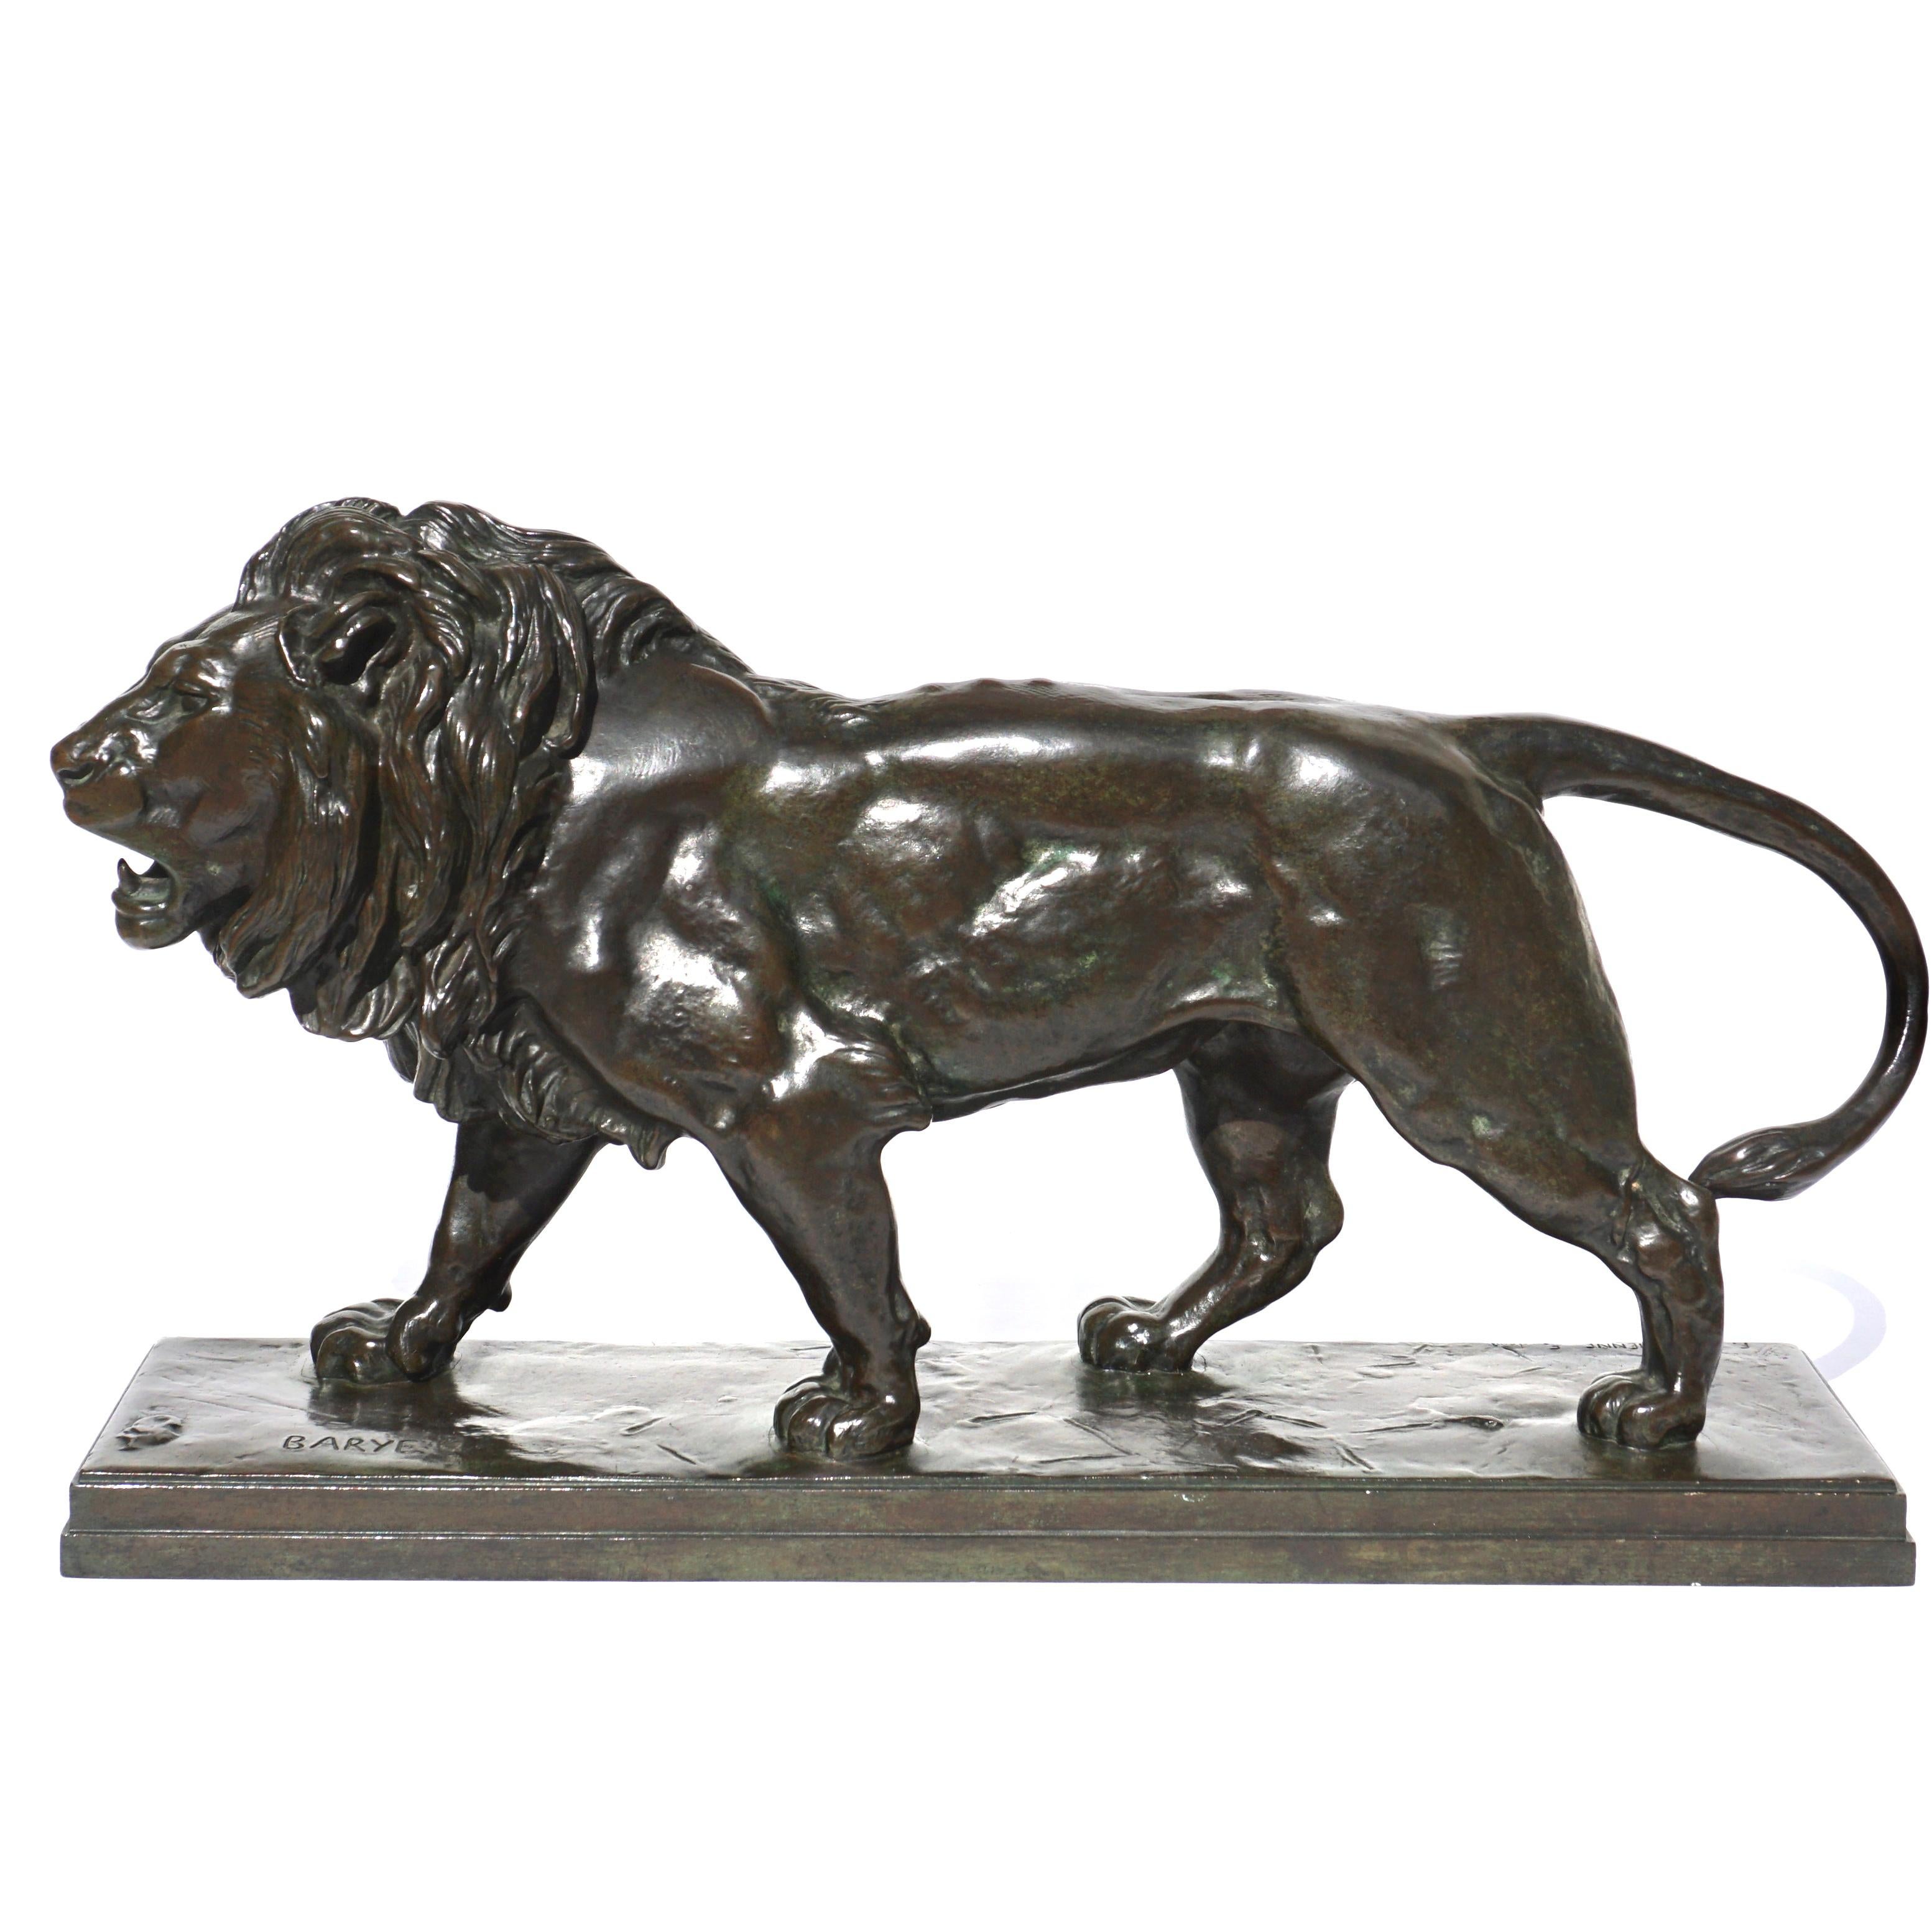 Antoine-Louis Barye (French, 1796-1875) bronze striding lion, 
F Barbedienne Fondeur foundry 
Circa 1880. 
Patinated chocolate brown patina.

Dimensions: 16 x 9 x 4 inches

Signed: “BARYE” and “F. Barbedienne Fondeur”

Condition: